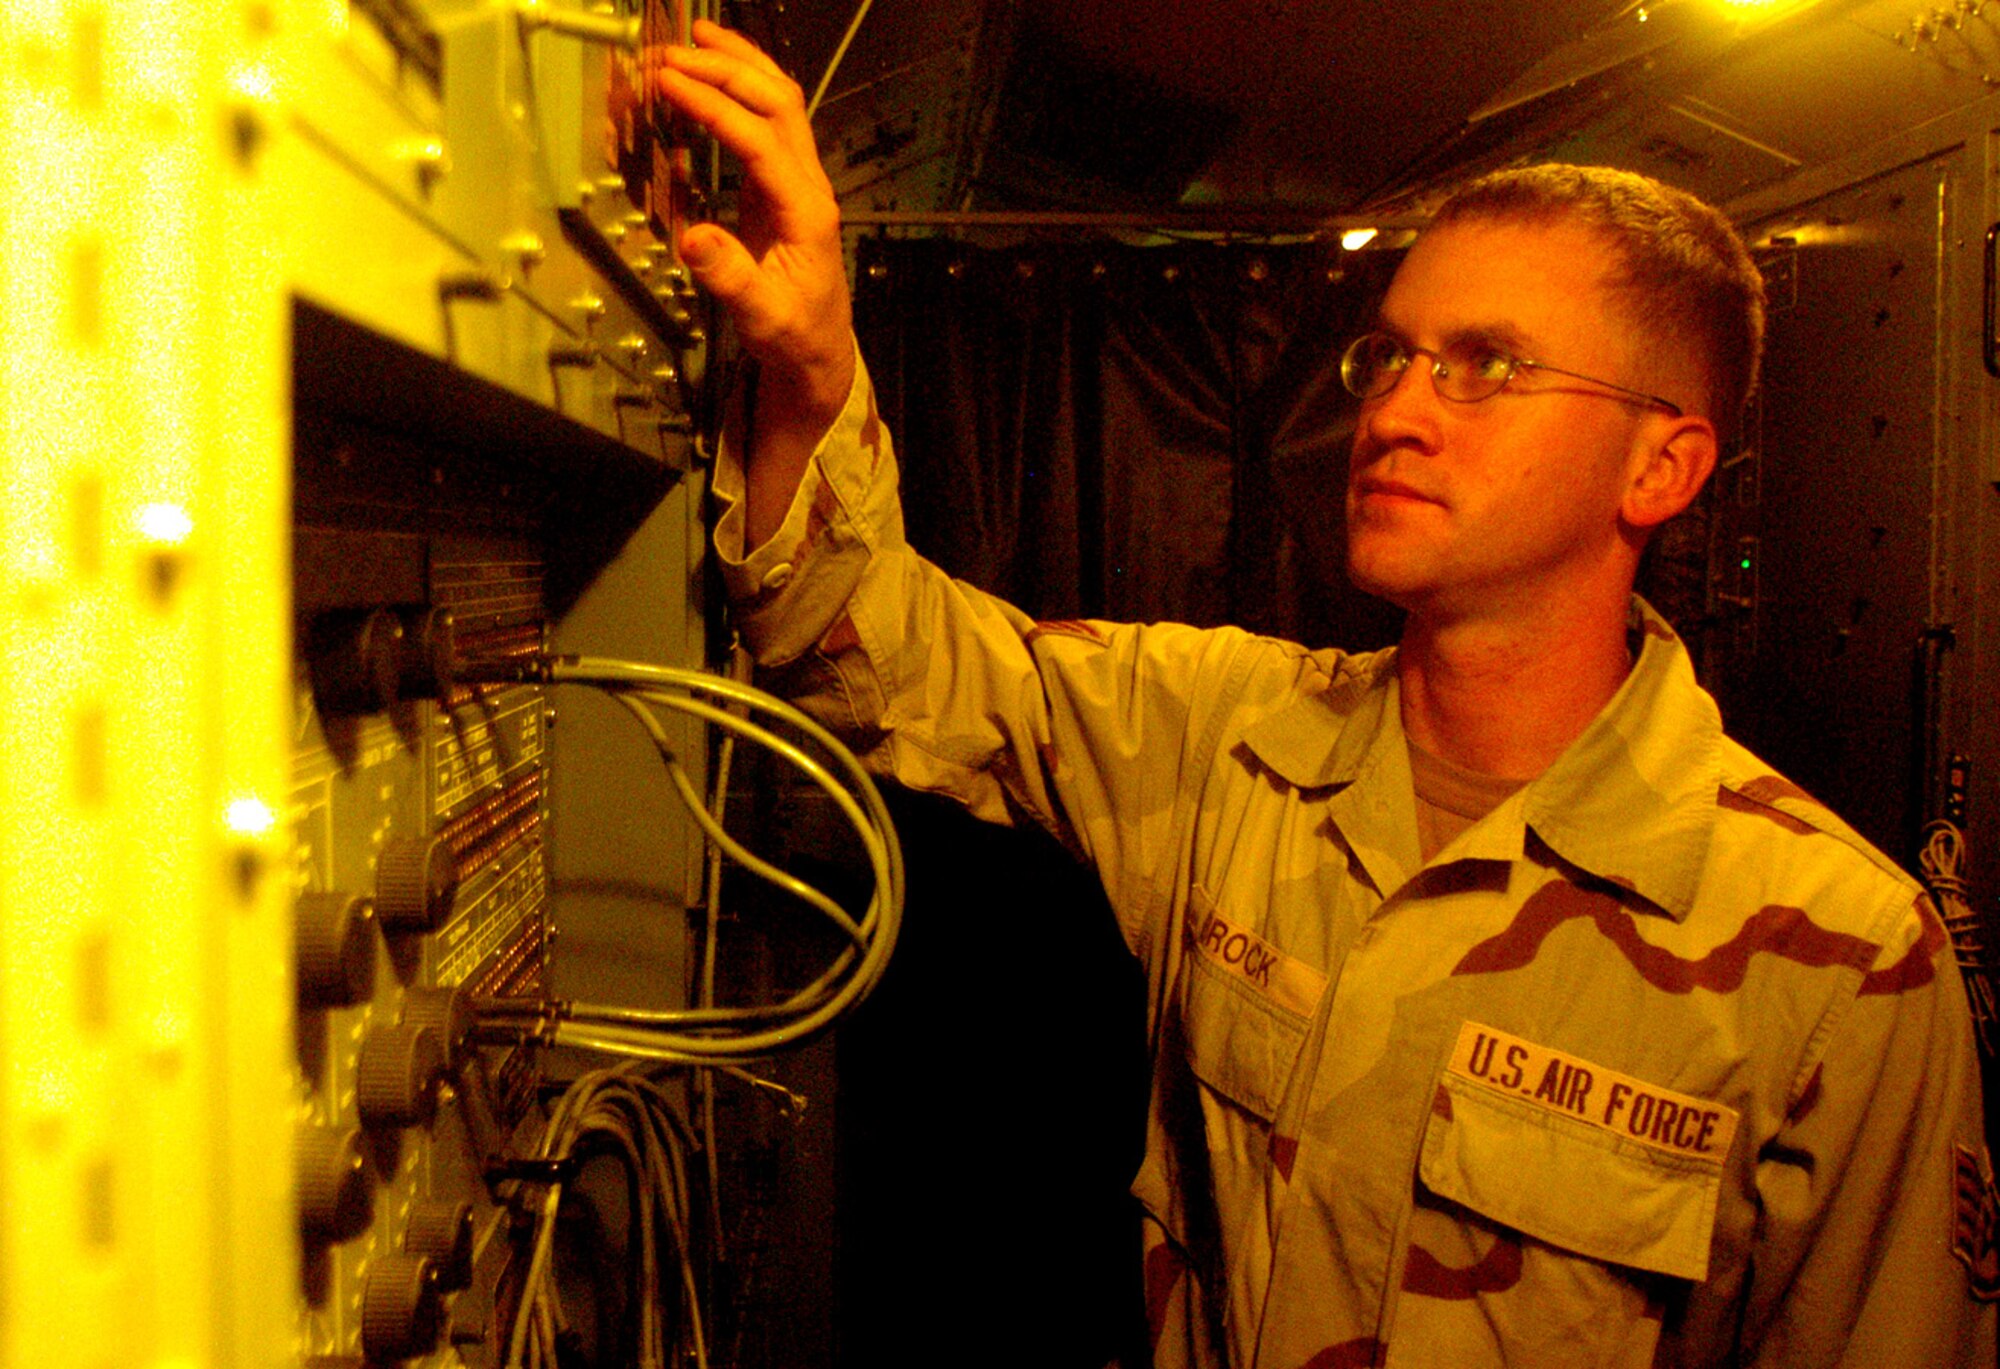 Staff Sgt. Kyle Brock makes adjustments in an operations module at the 73rd Expeditionary Air Control Squadron at Kandahar Airfield, Afghanistan, on Saturday, June 3. Sergeant Brock is a computer maintenance technician deployed from Spangdahlem Air Base, Germany. (U.S. Air Force photo/Maj. David Kurle)